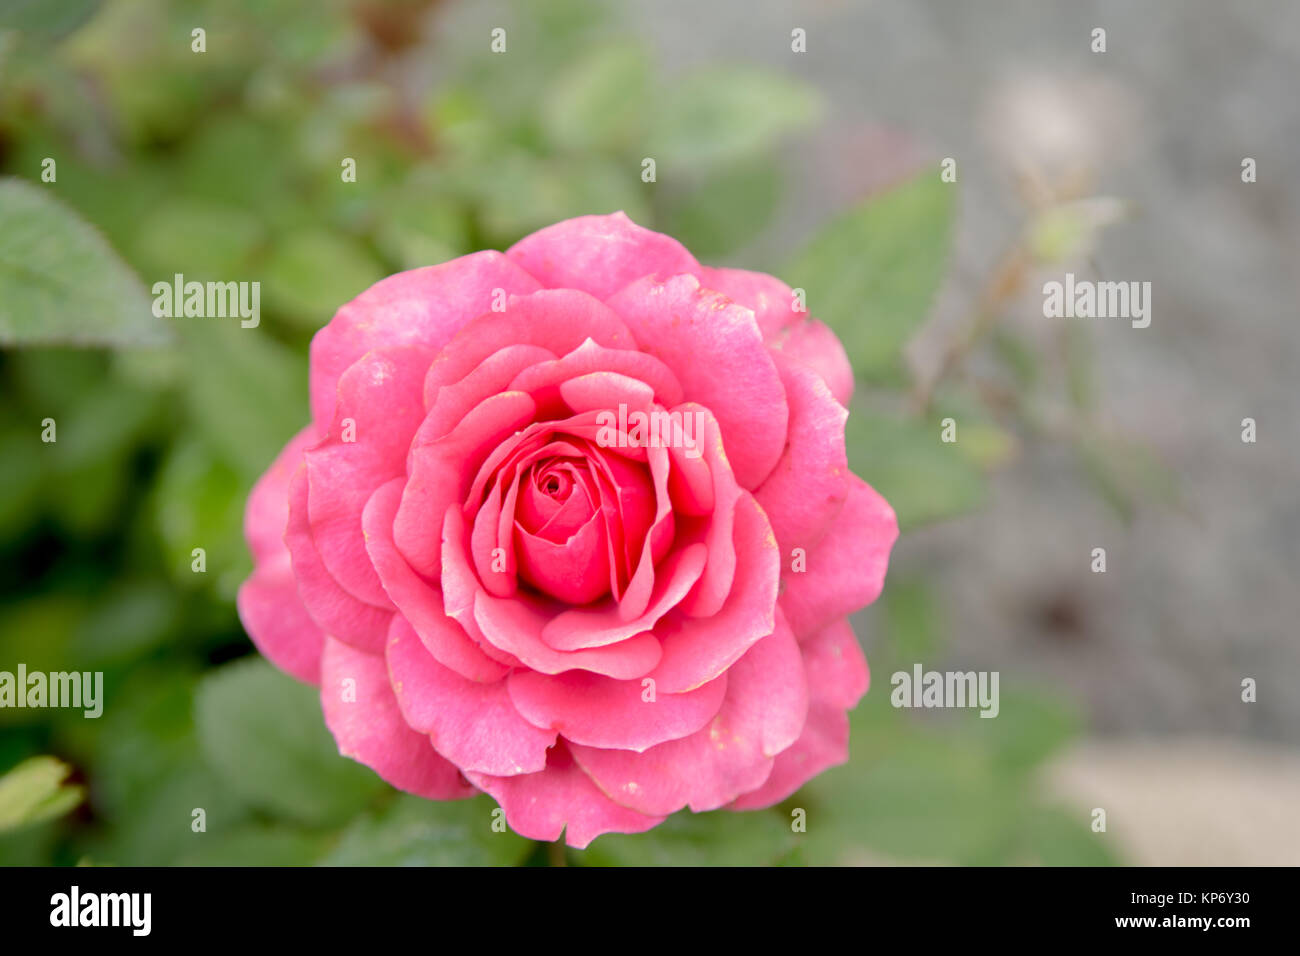 Pink rose growing outside with green garden background Stock Photo